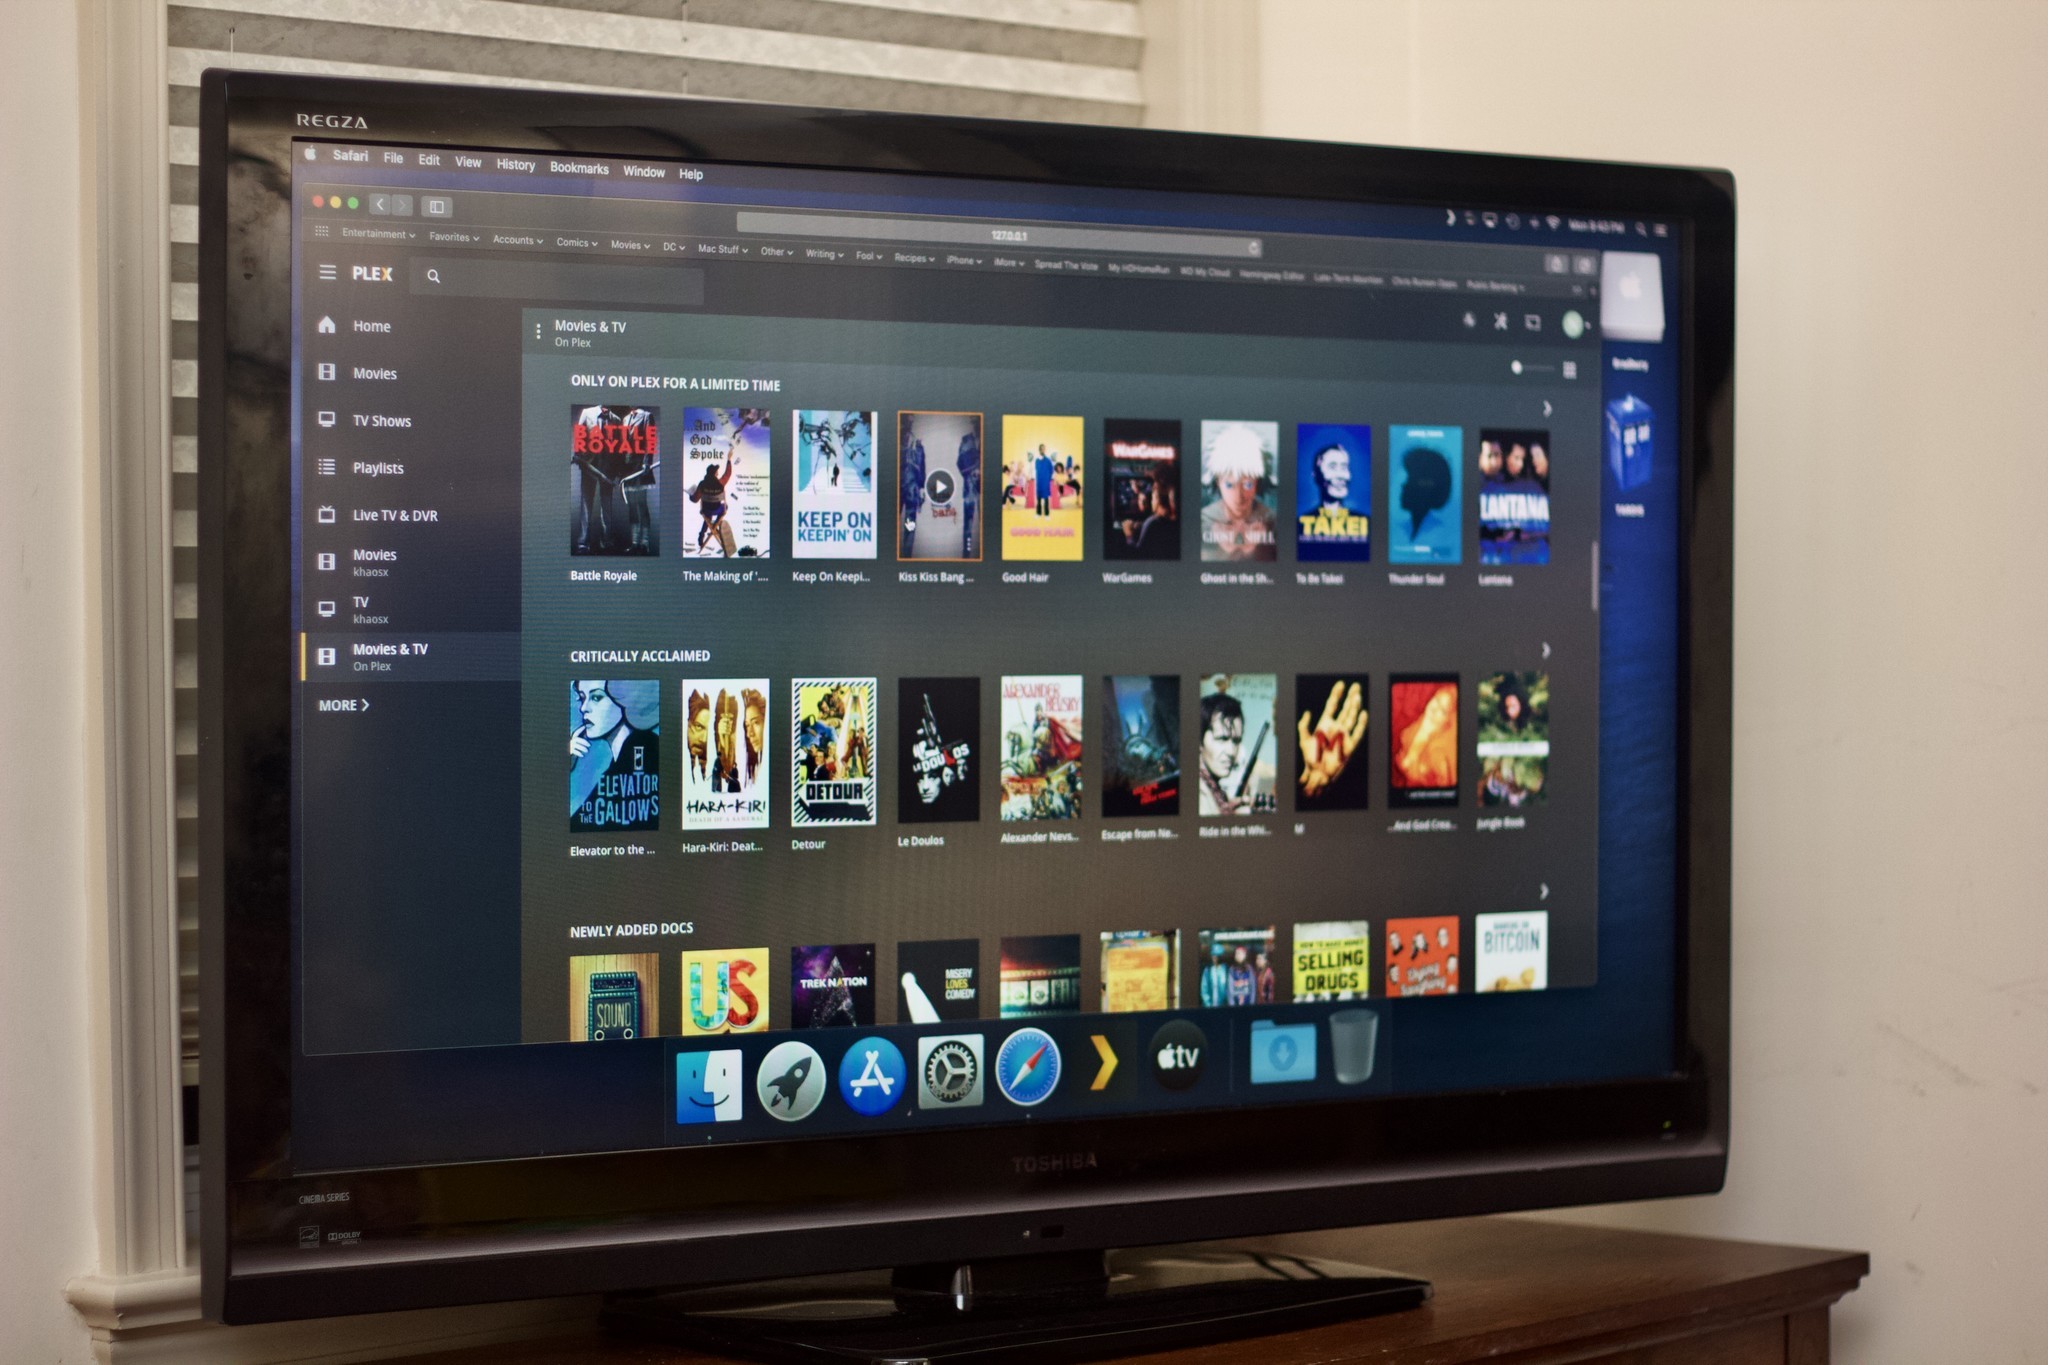 Plex offers a free streaming movie and TV service.